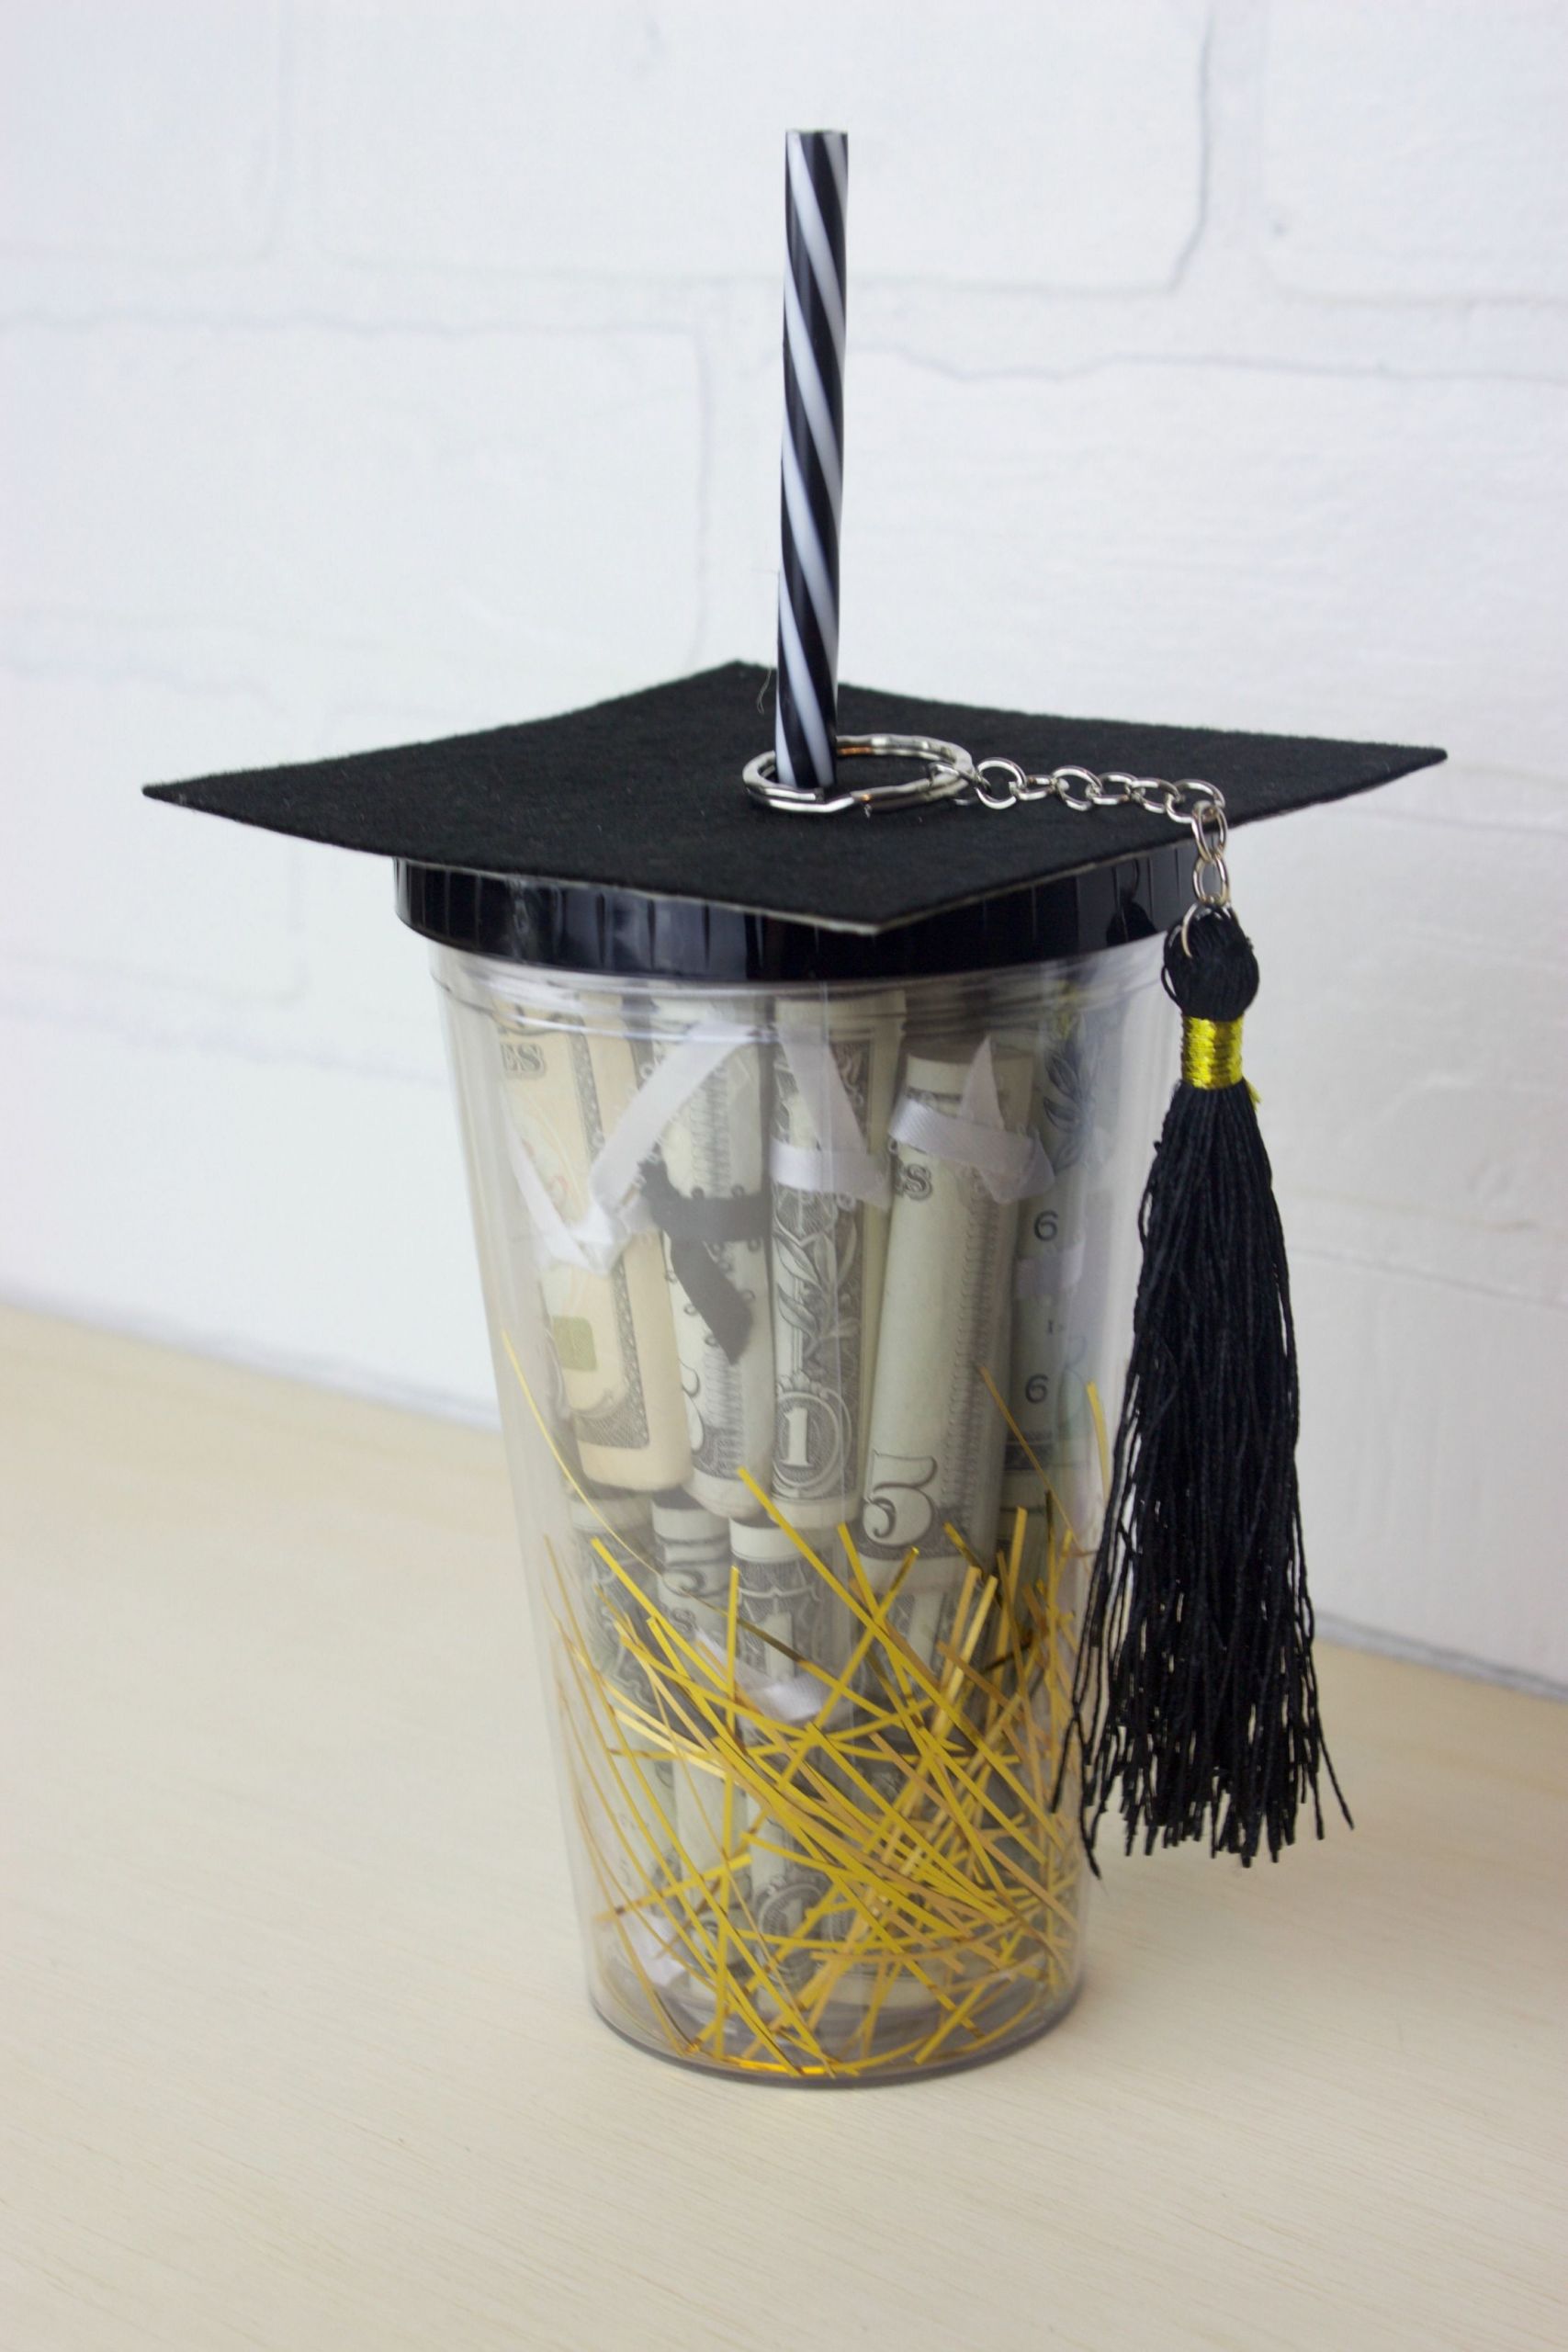 Elementary Graduation Gift Ideas
 DIY Graduation Gift in a Cup